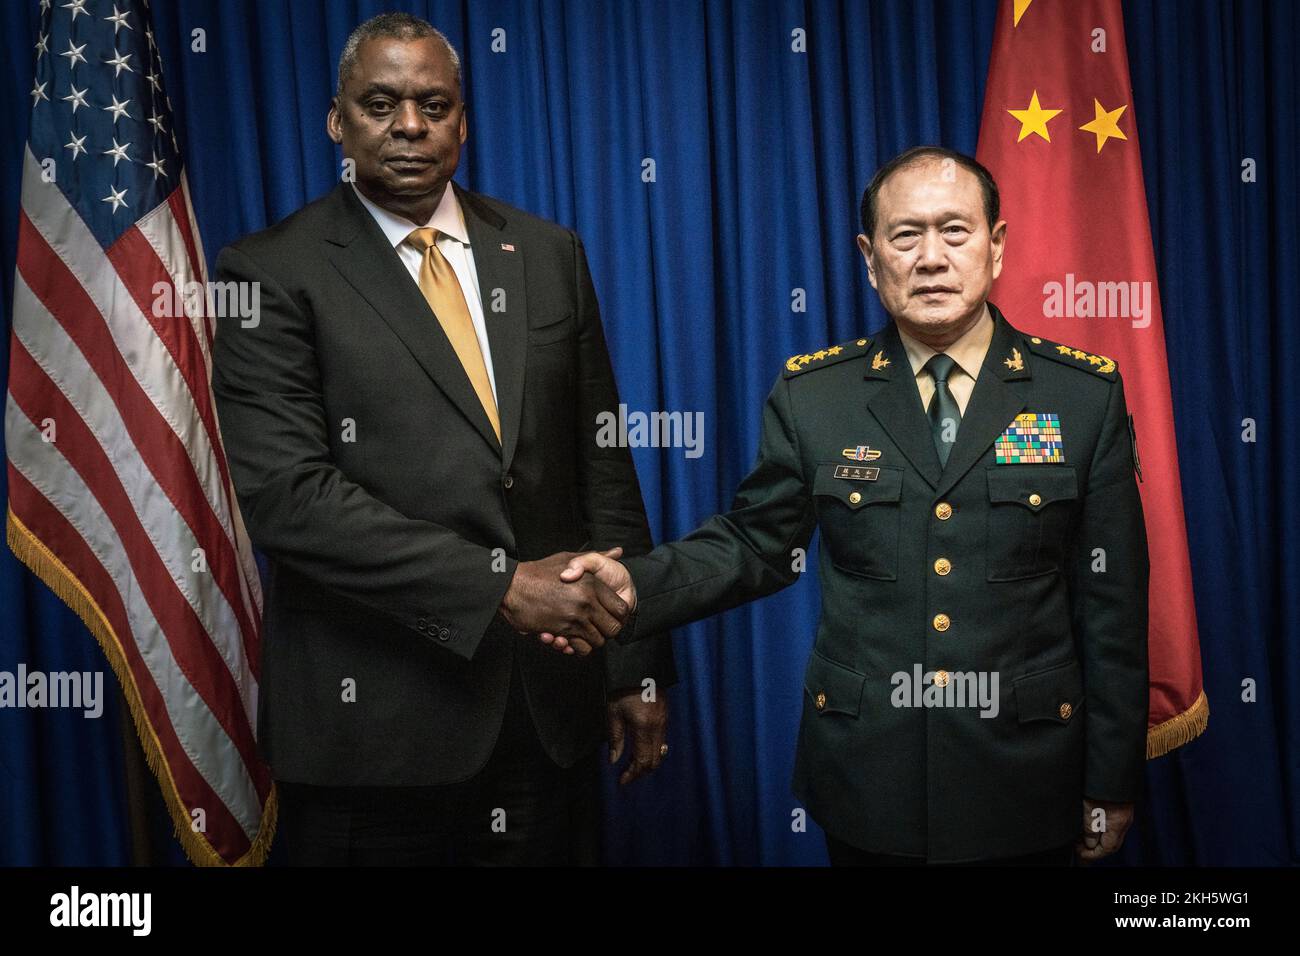 Siem Reap, Cambodia. 22nd Nov, 2022. U.S. Secretary of Defense Lloyd J. Austin III, left, shakes hands with Chinese Minister of National Defense Gen. Wei Fenghe, on the sidelines of the 9th Association of Southeast Asia Nations Defense Ministers Meeting, November 22, 2022 in Siem Reap, Cambodia. Credit: Chad J. McNeeley/DOD/Alamy Live News Stock Photo